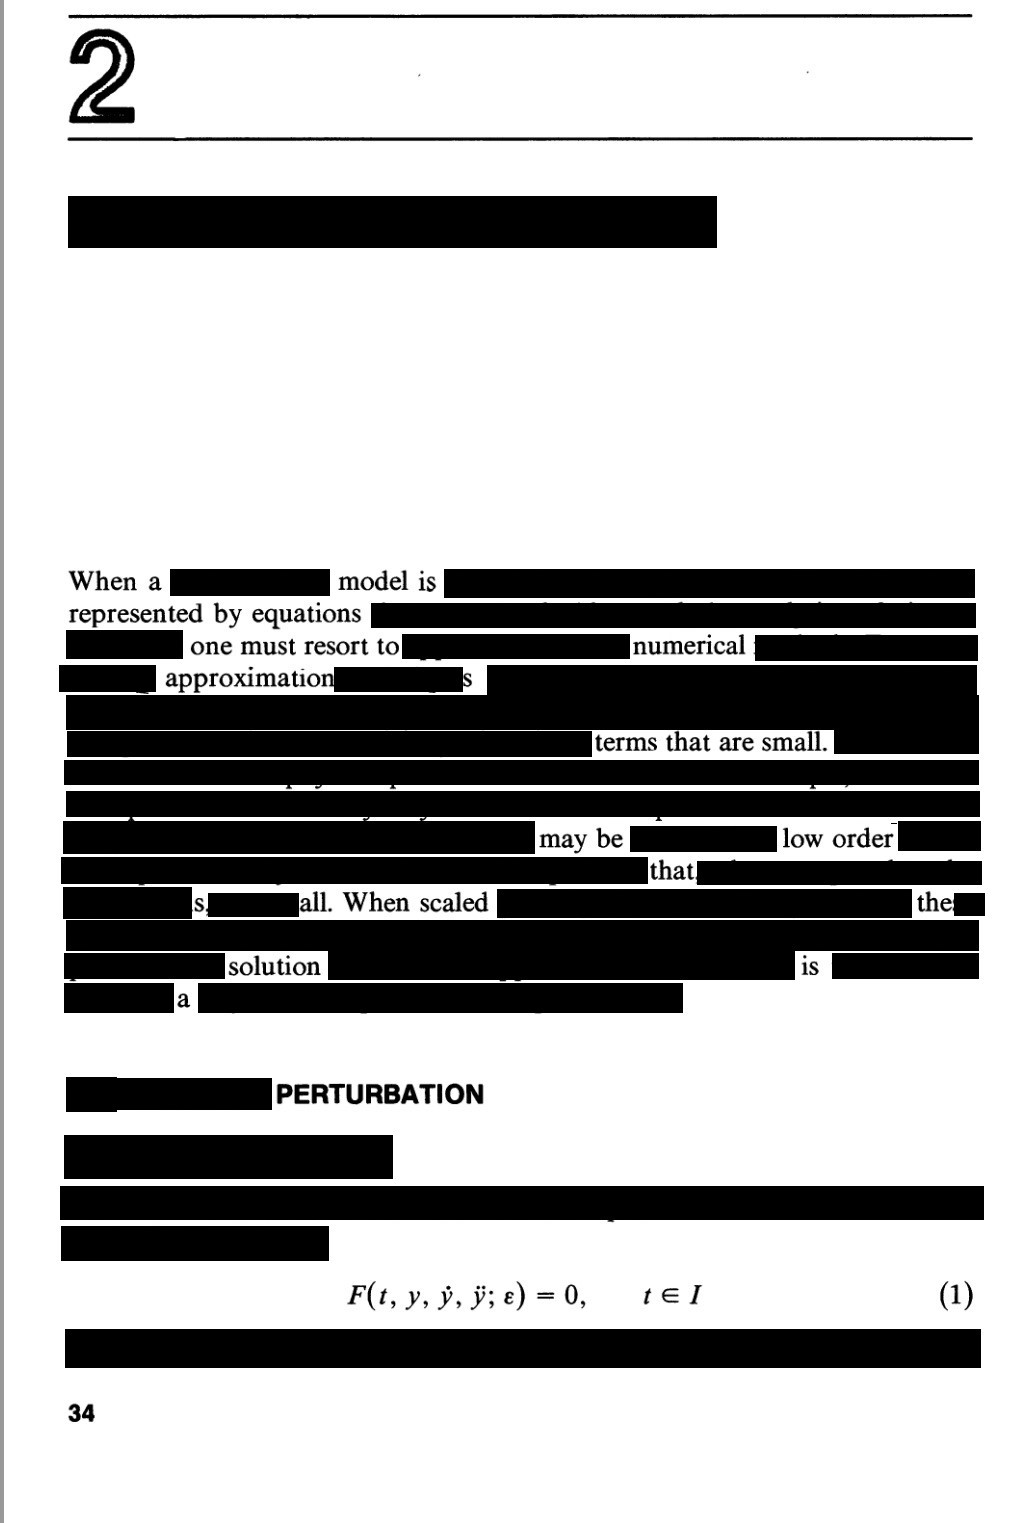 An erasure poem entitled 'Perturbations' using the book 'Applied Mathematics: A Contemporary Approach' by J. D. Logan